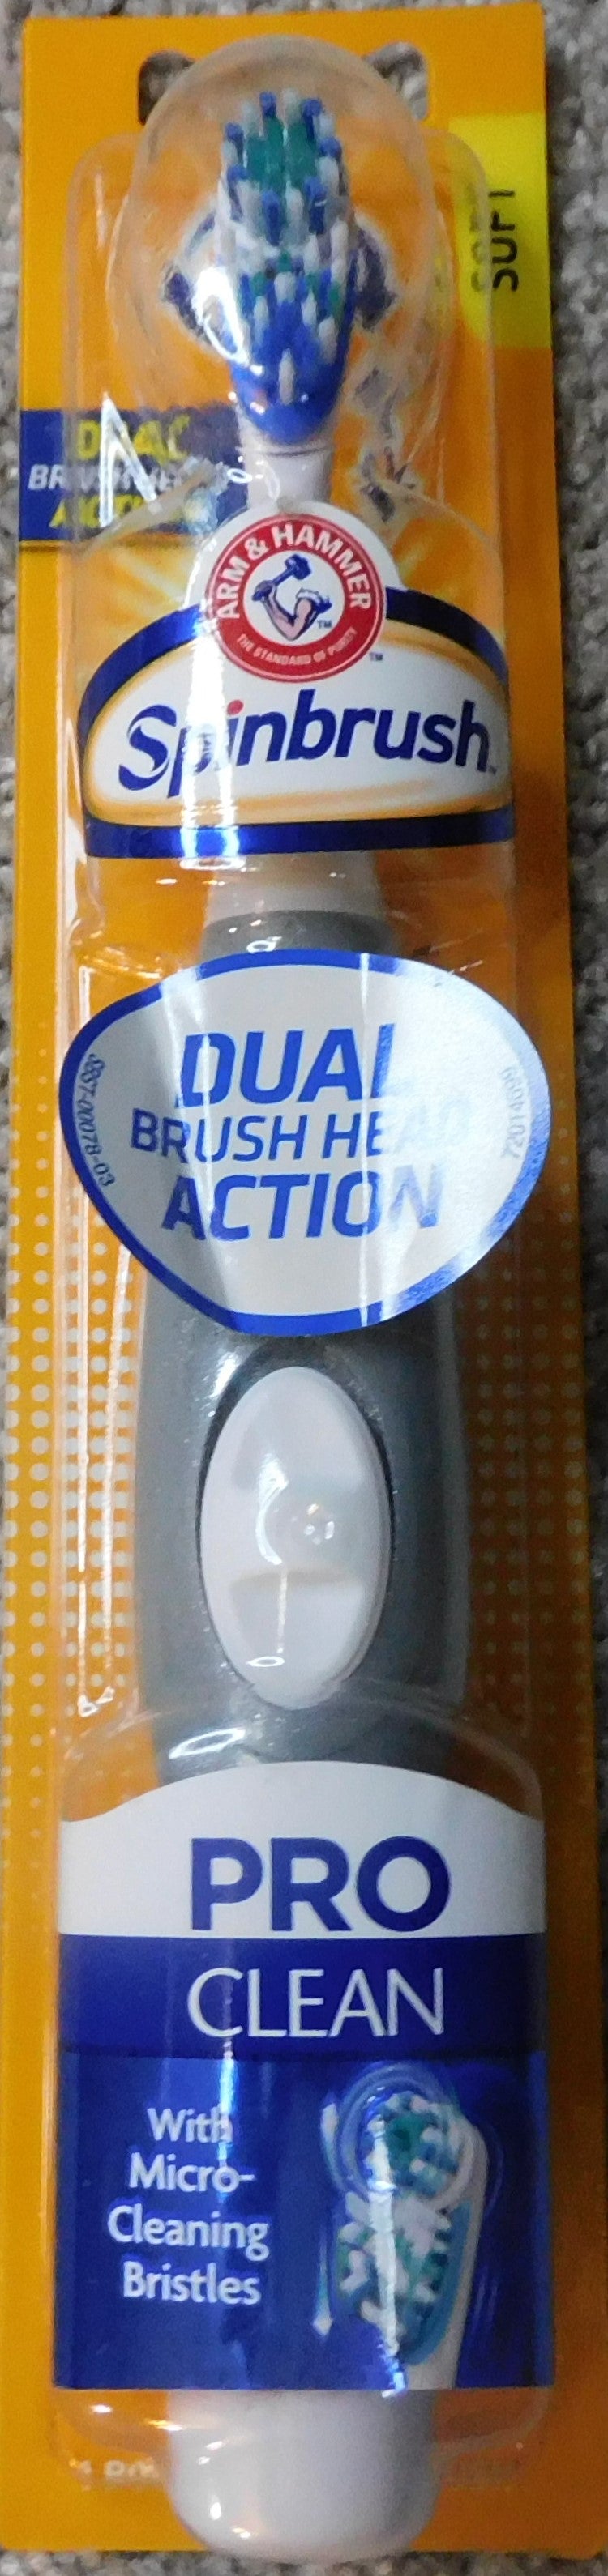 Arm & Hammer Spinbrush Pro Series Daily Clean Battery Toothbrush - Variety Sales Etc.